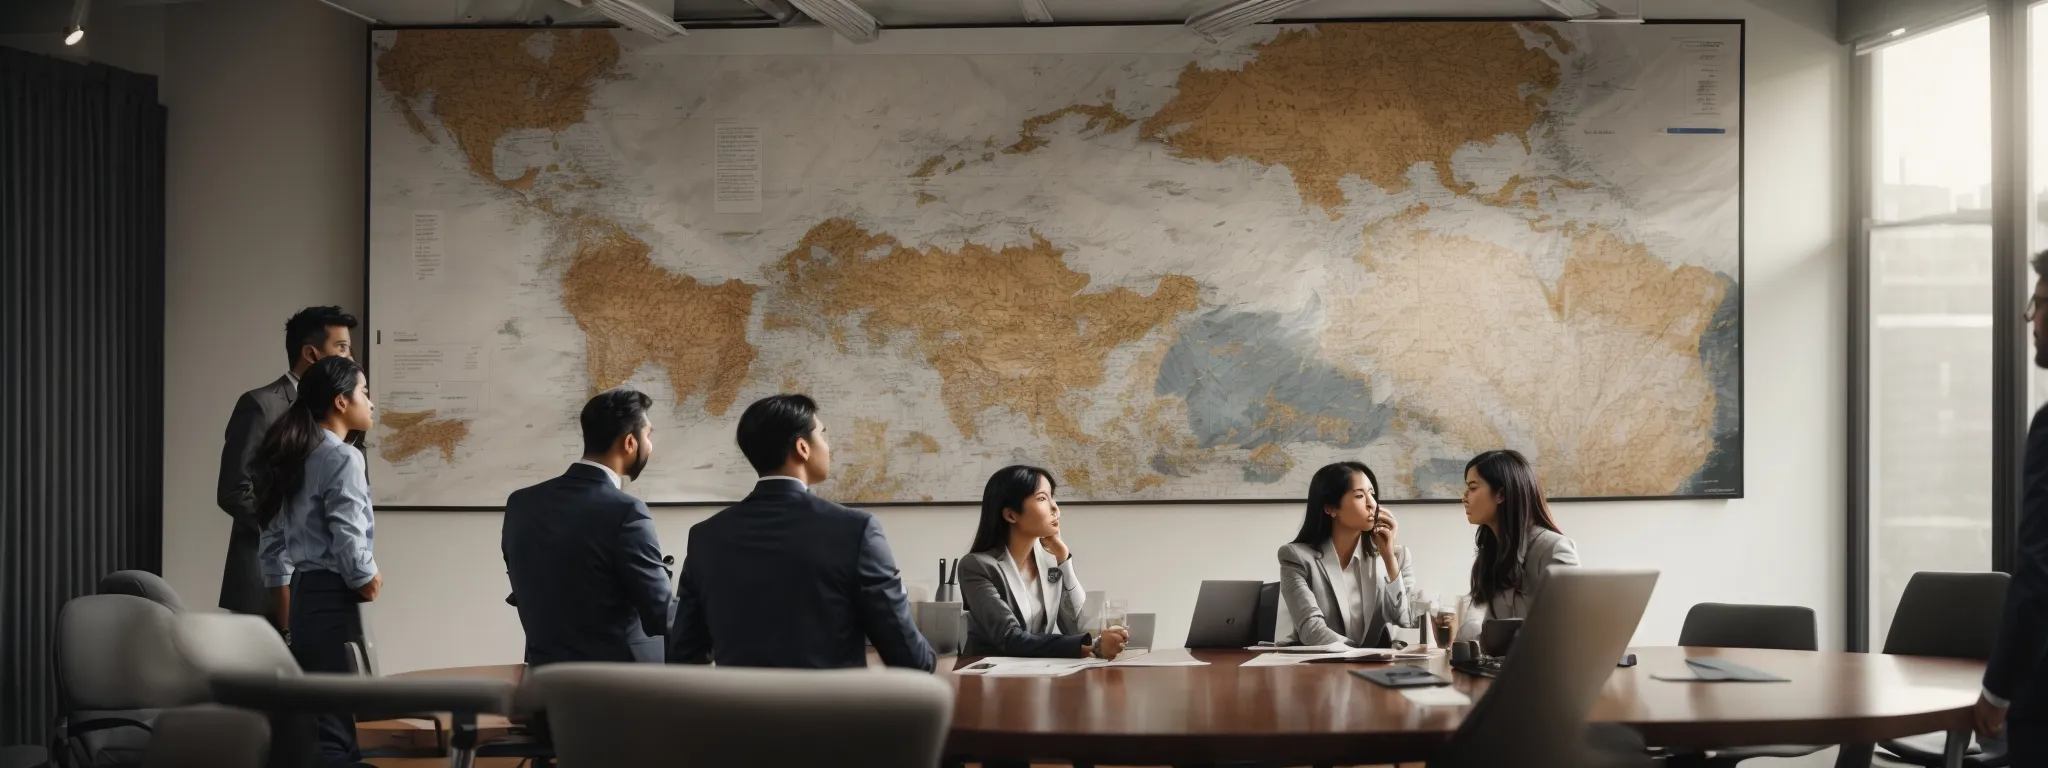 a team of professionals gathers around a conference table, engaged in a strategic discussion under a large, abstract infographic on the wall.